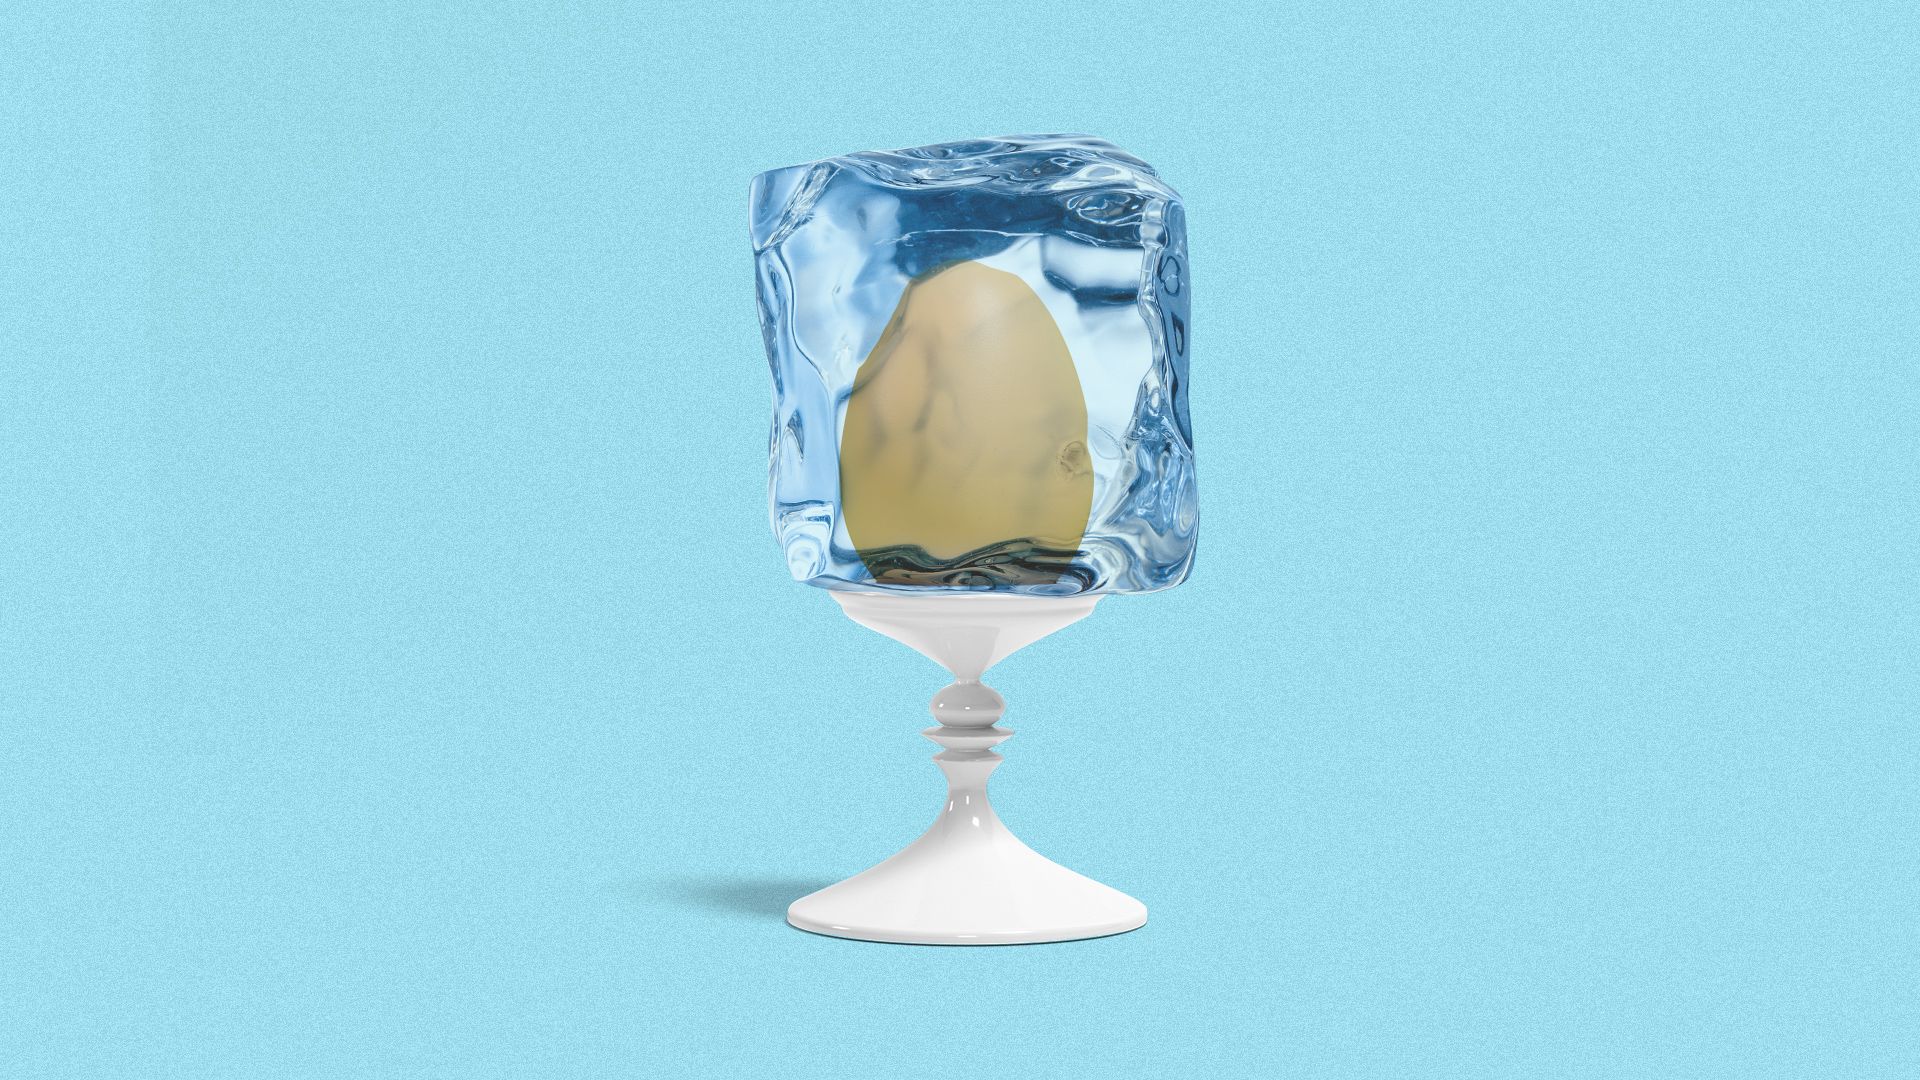 Illustration of an egg in an ice cube on a pedestal. 